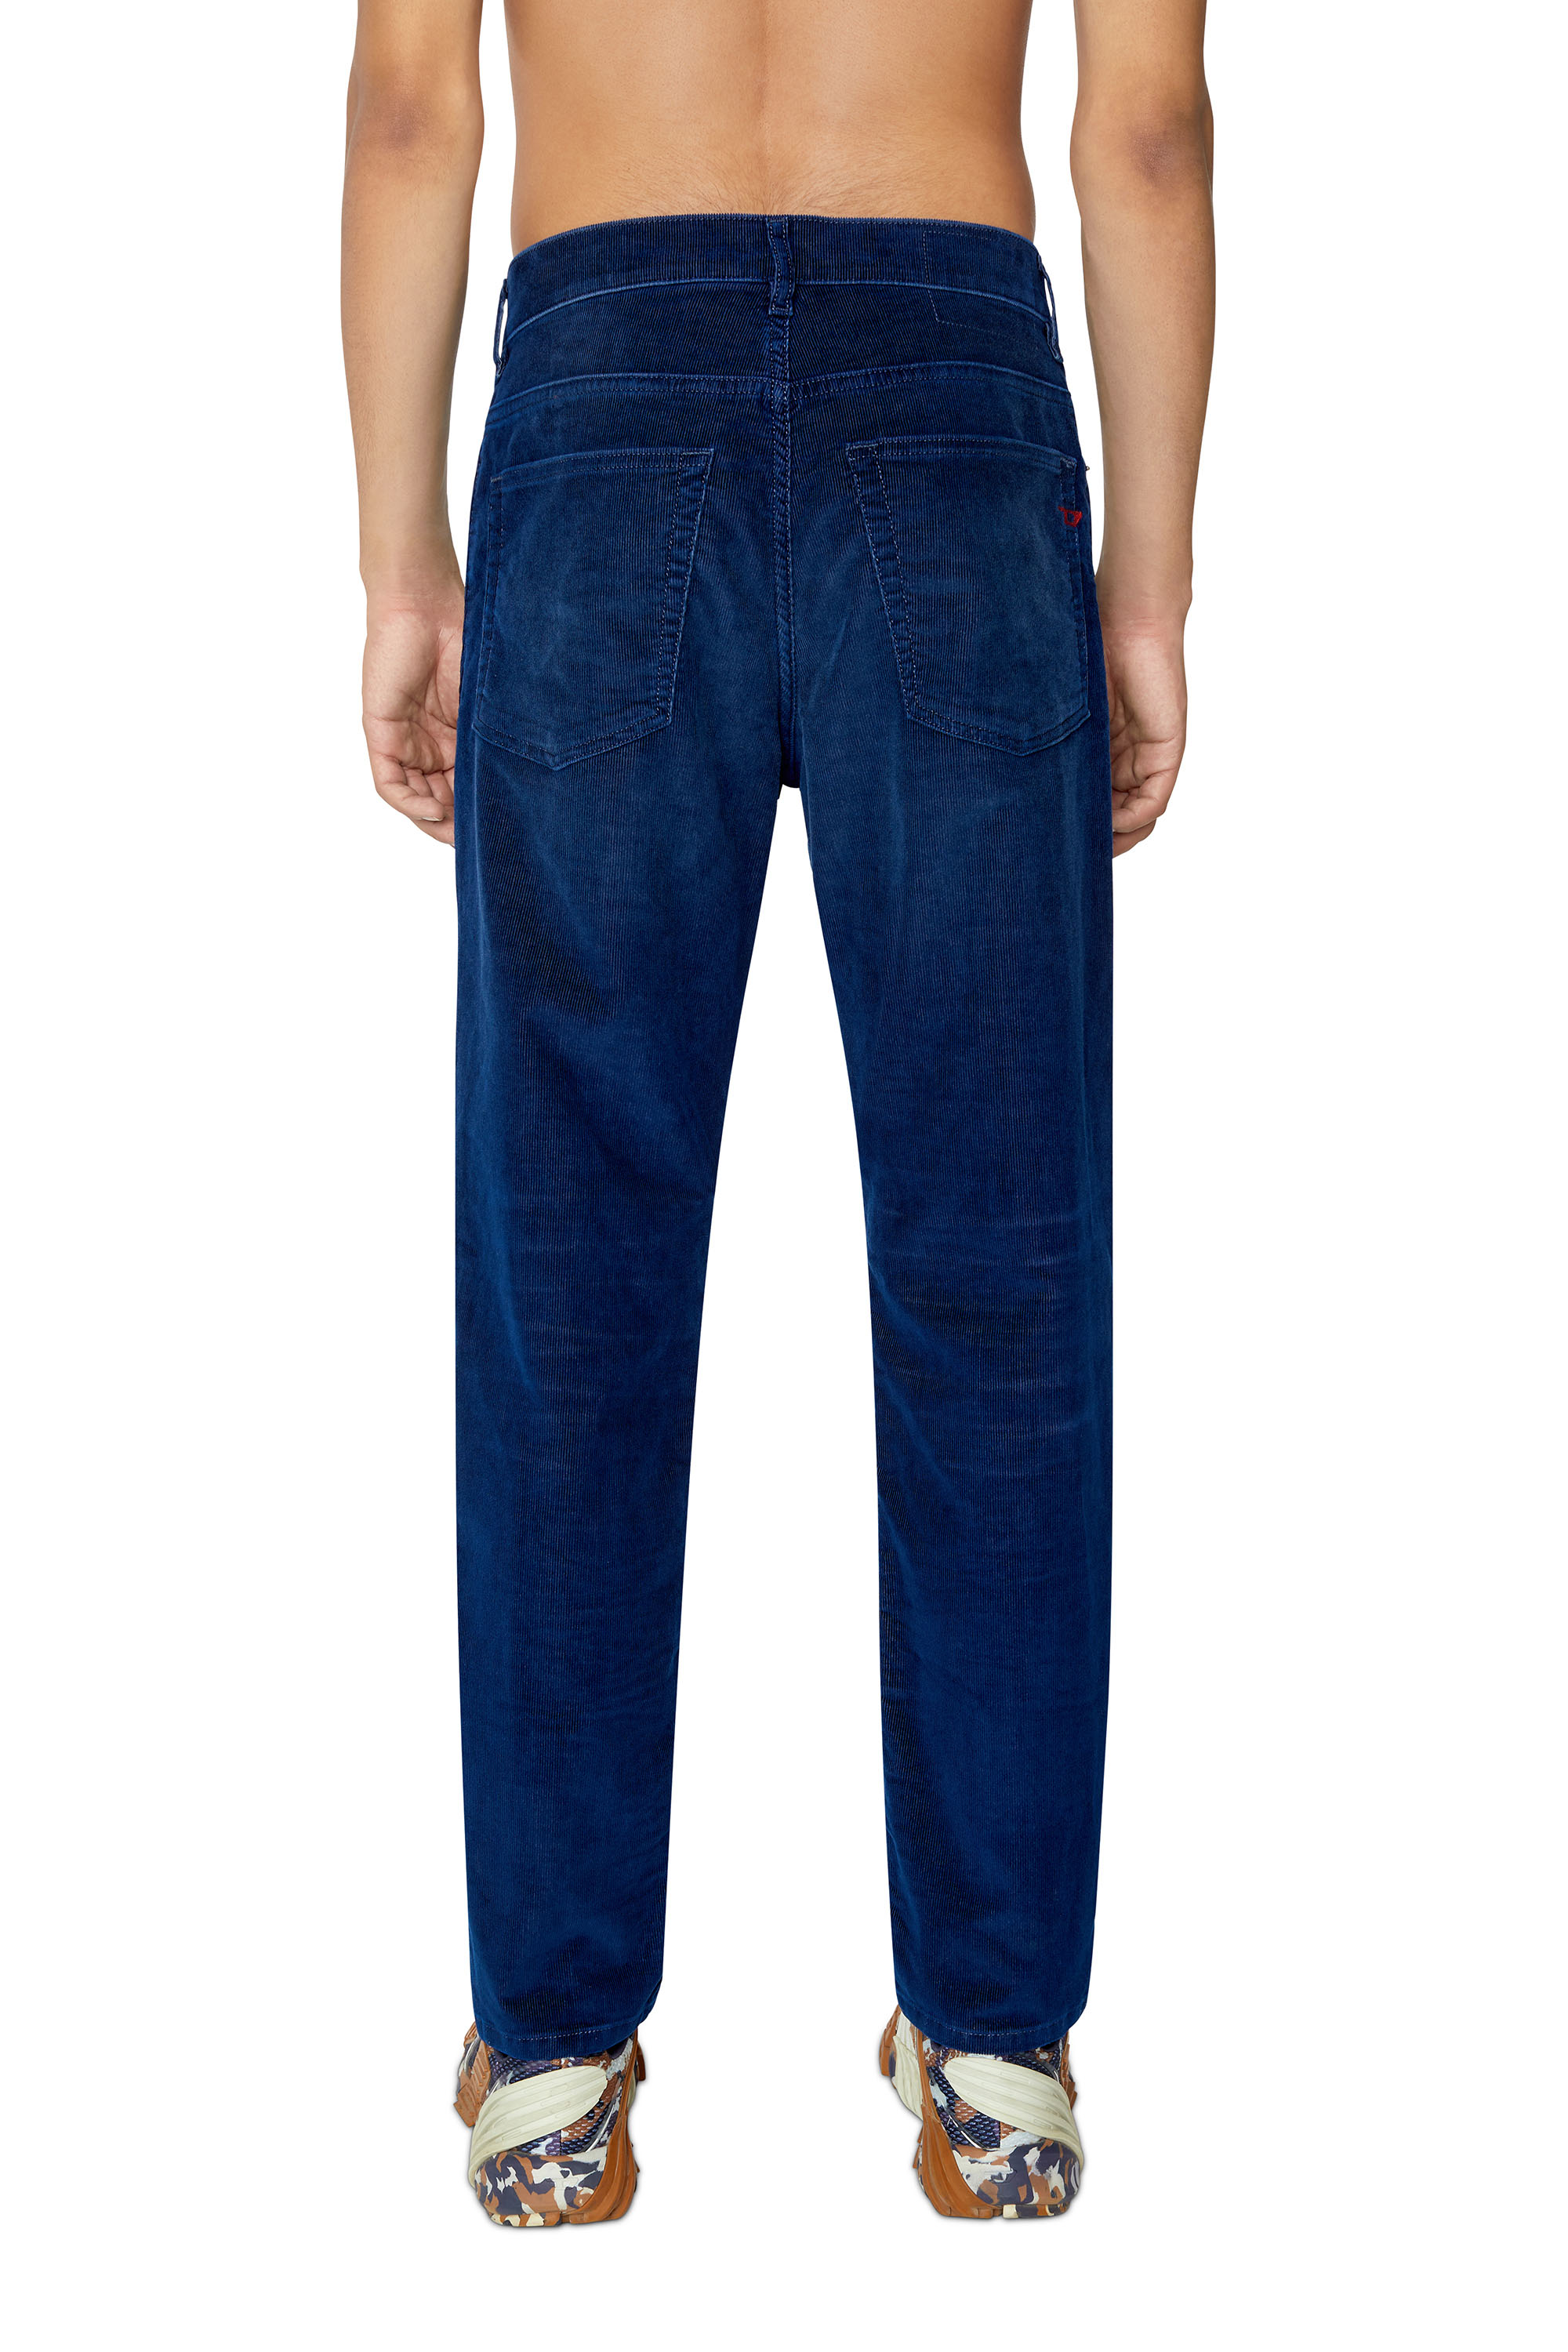 2005 D-FINING Man: Tapered colored Jeans | Diesel